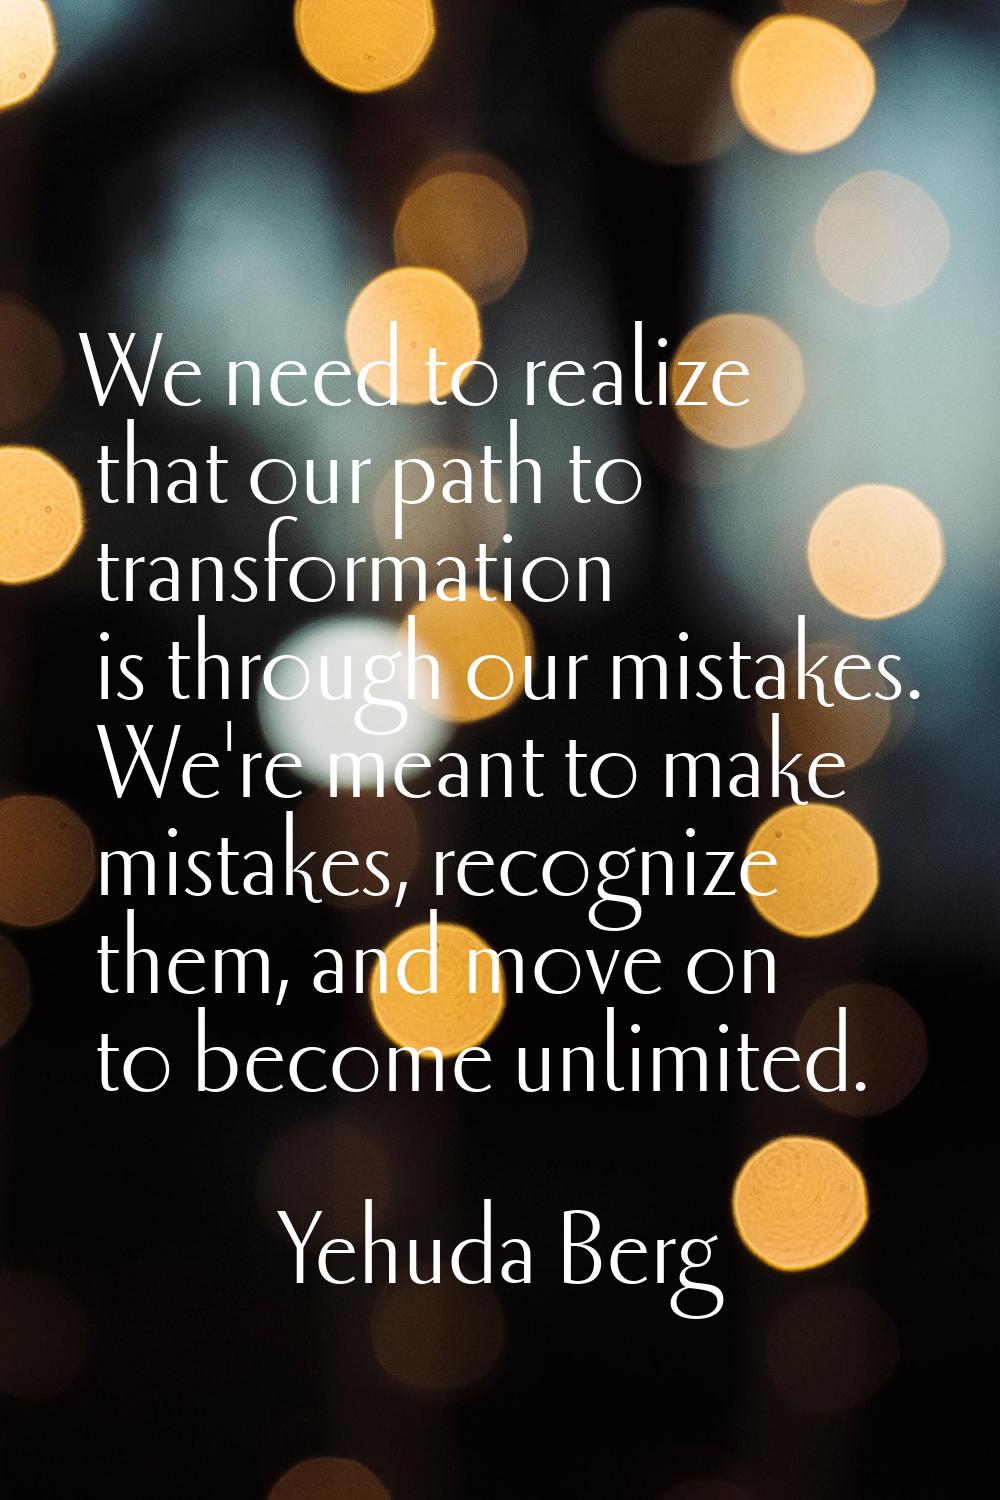 We need to realize that our path to transformation is through our mistakes. We're meant to make mis